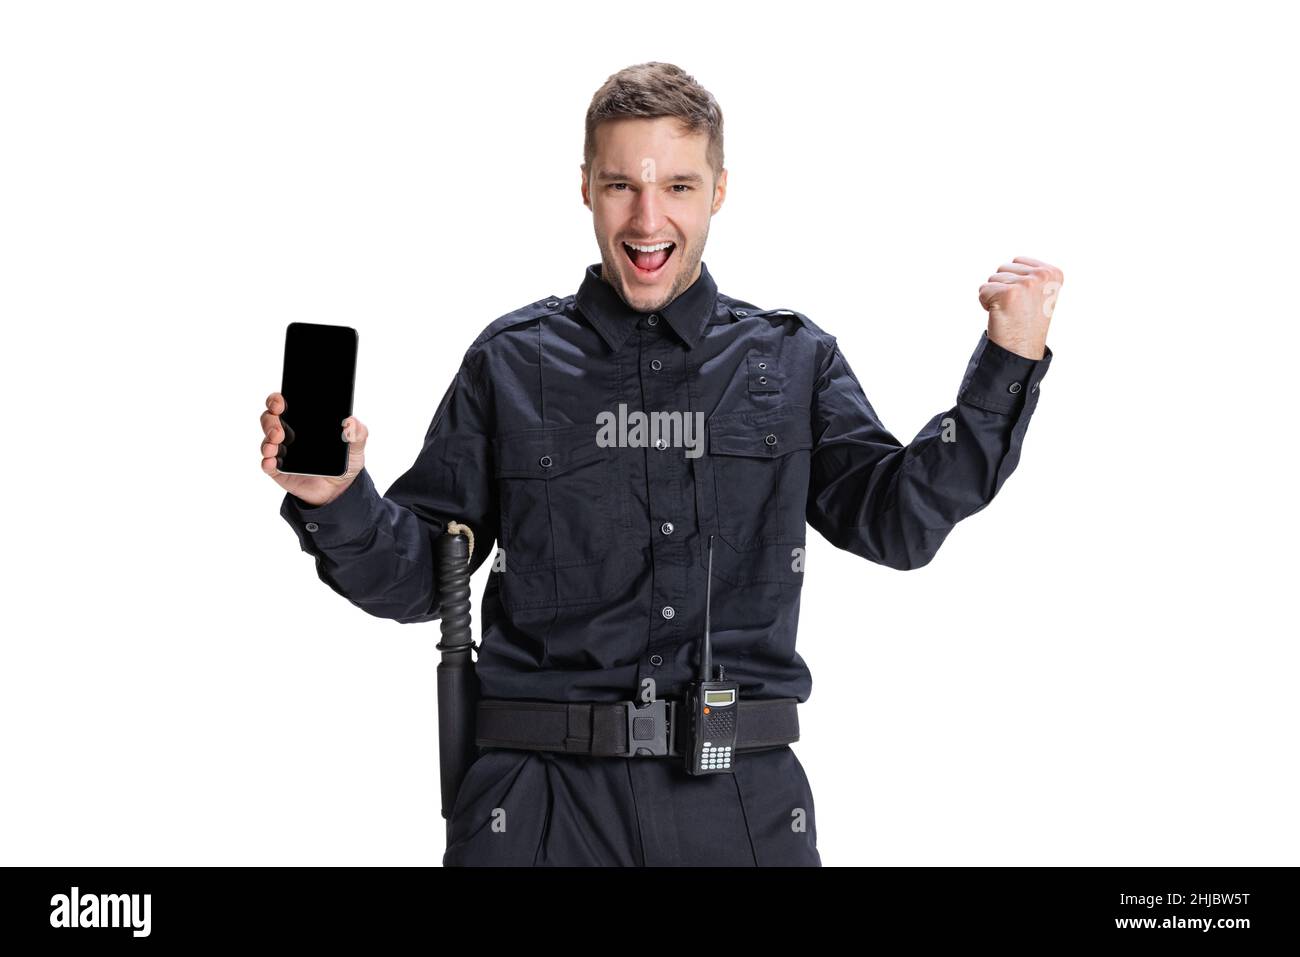 Portrait of young man, policeman officer wearing black uniform using phone isolated on white background. Concept of job, caree, law and order. Stock Photo